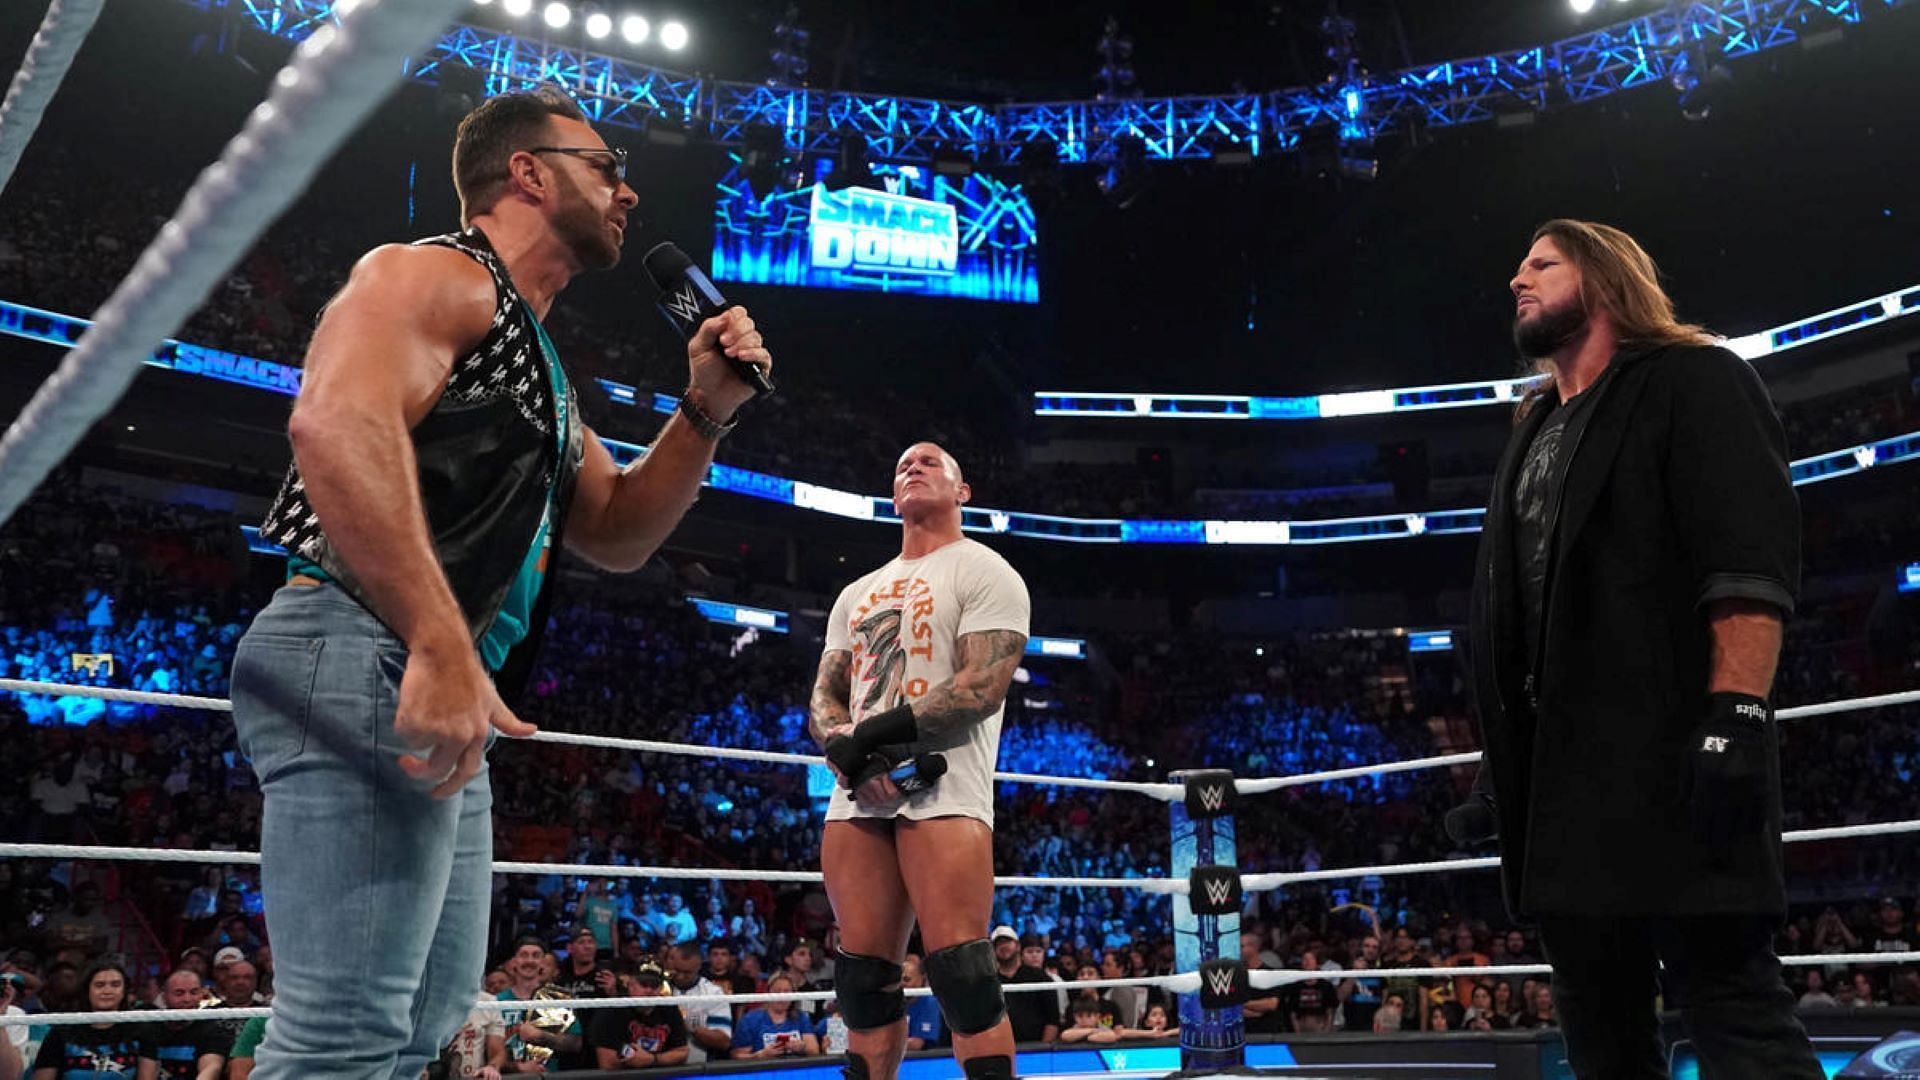 What&#039;s next for Knight, Orton, and Styles after the Royal Rumble?